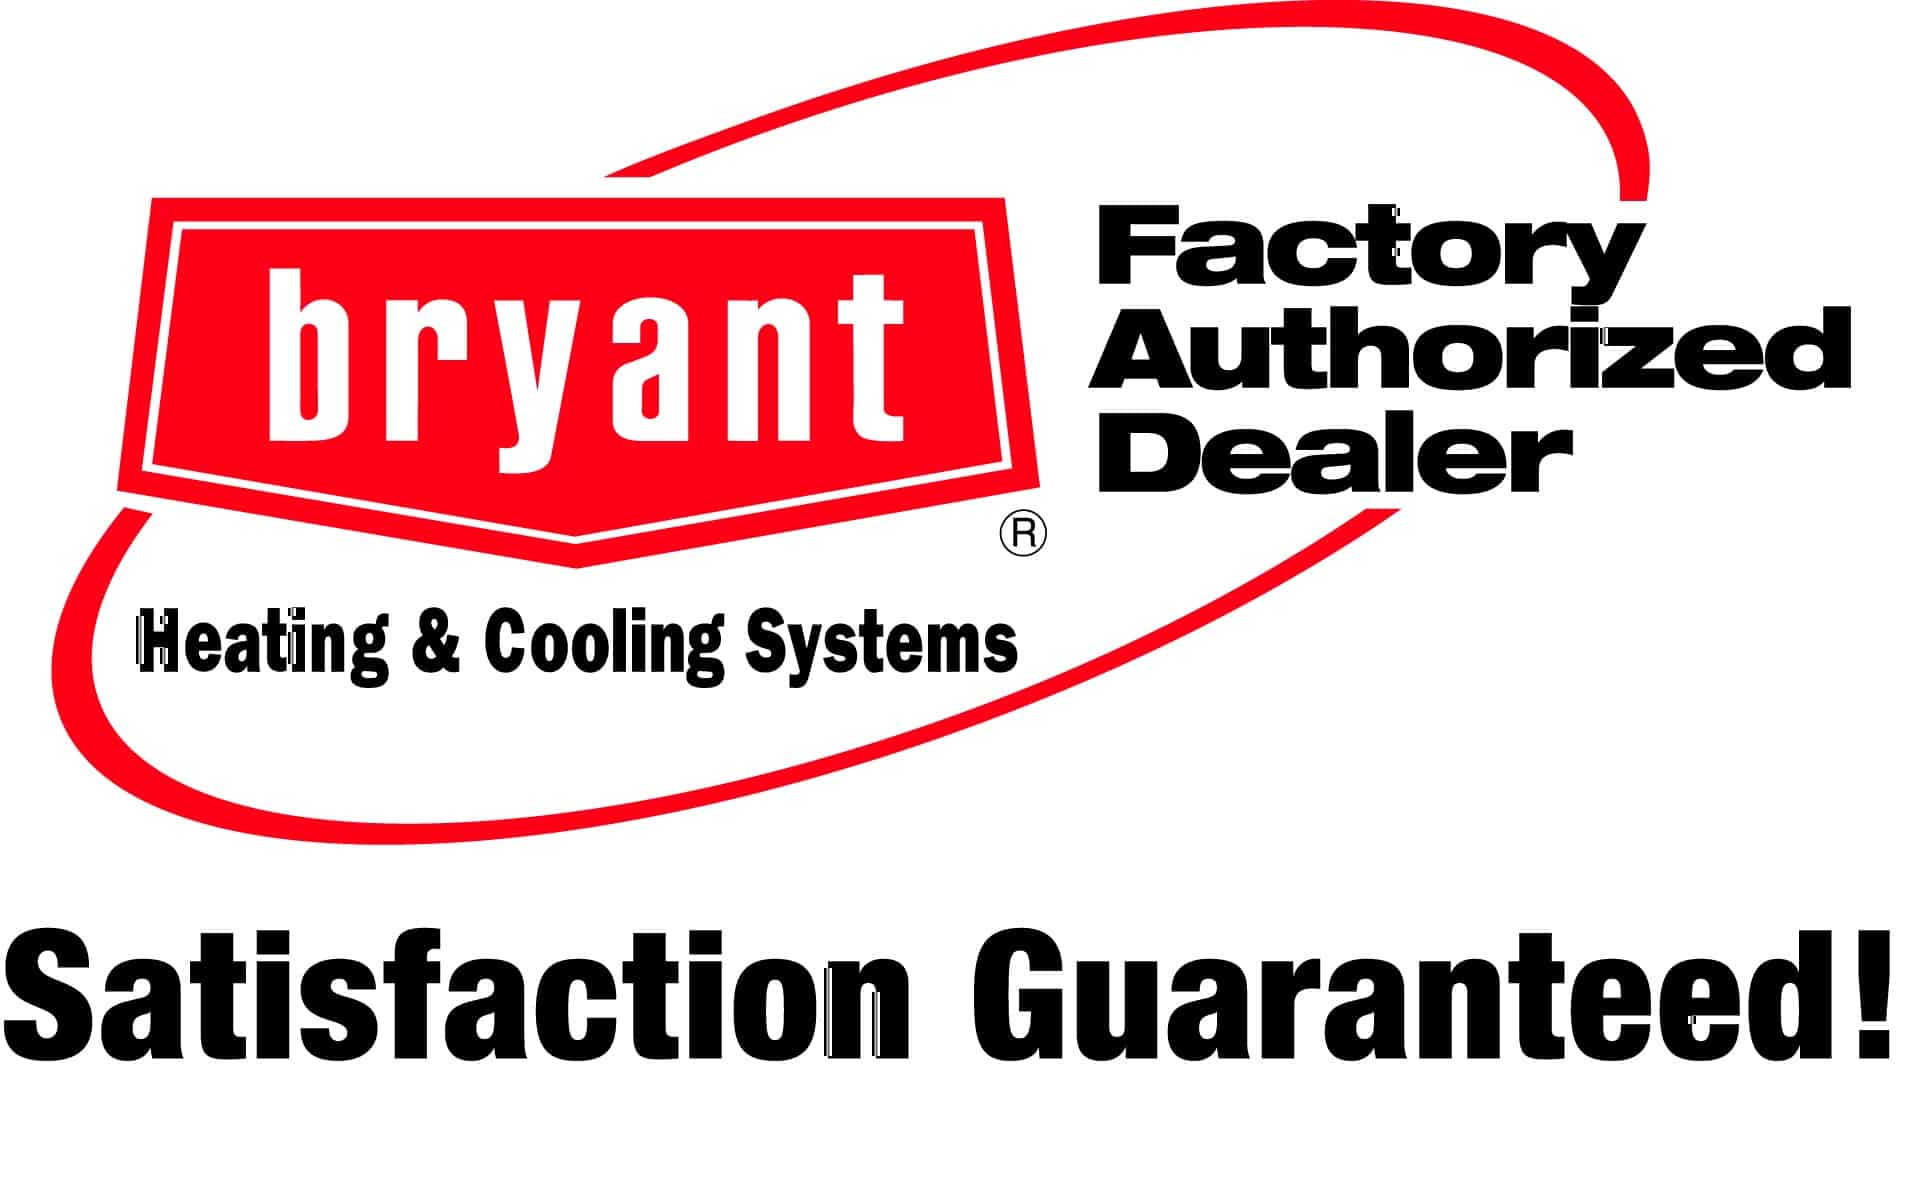 We are a Bryant Authroized Dealer which means your satisfaction is guaranteed.